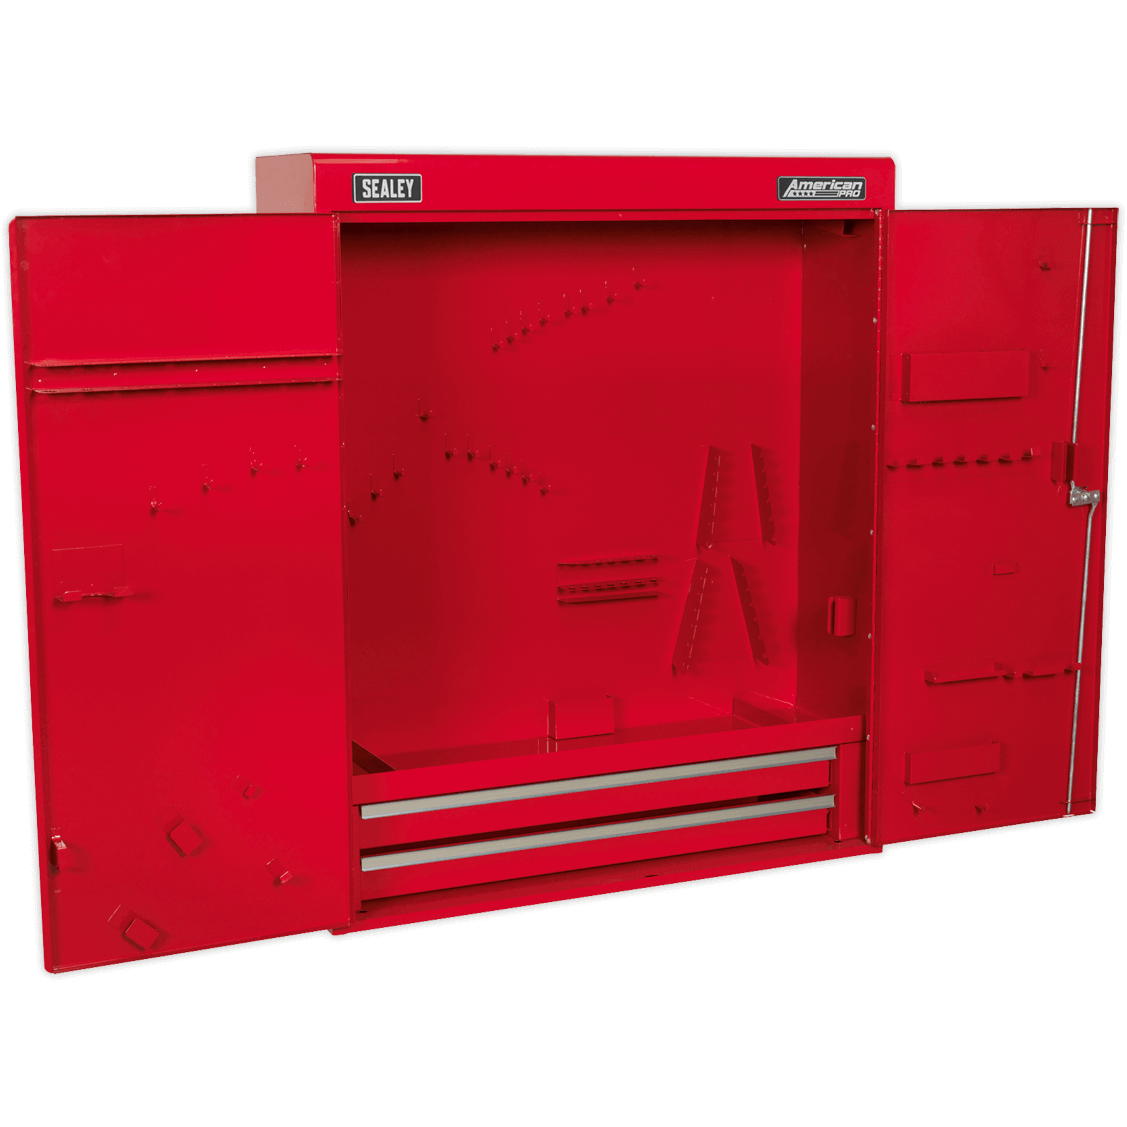 Sealey American Pro Wall Mounting 2 Drawer Tool Cabinet Red